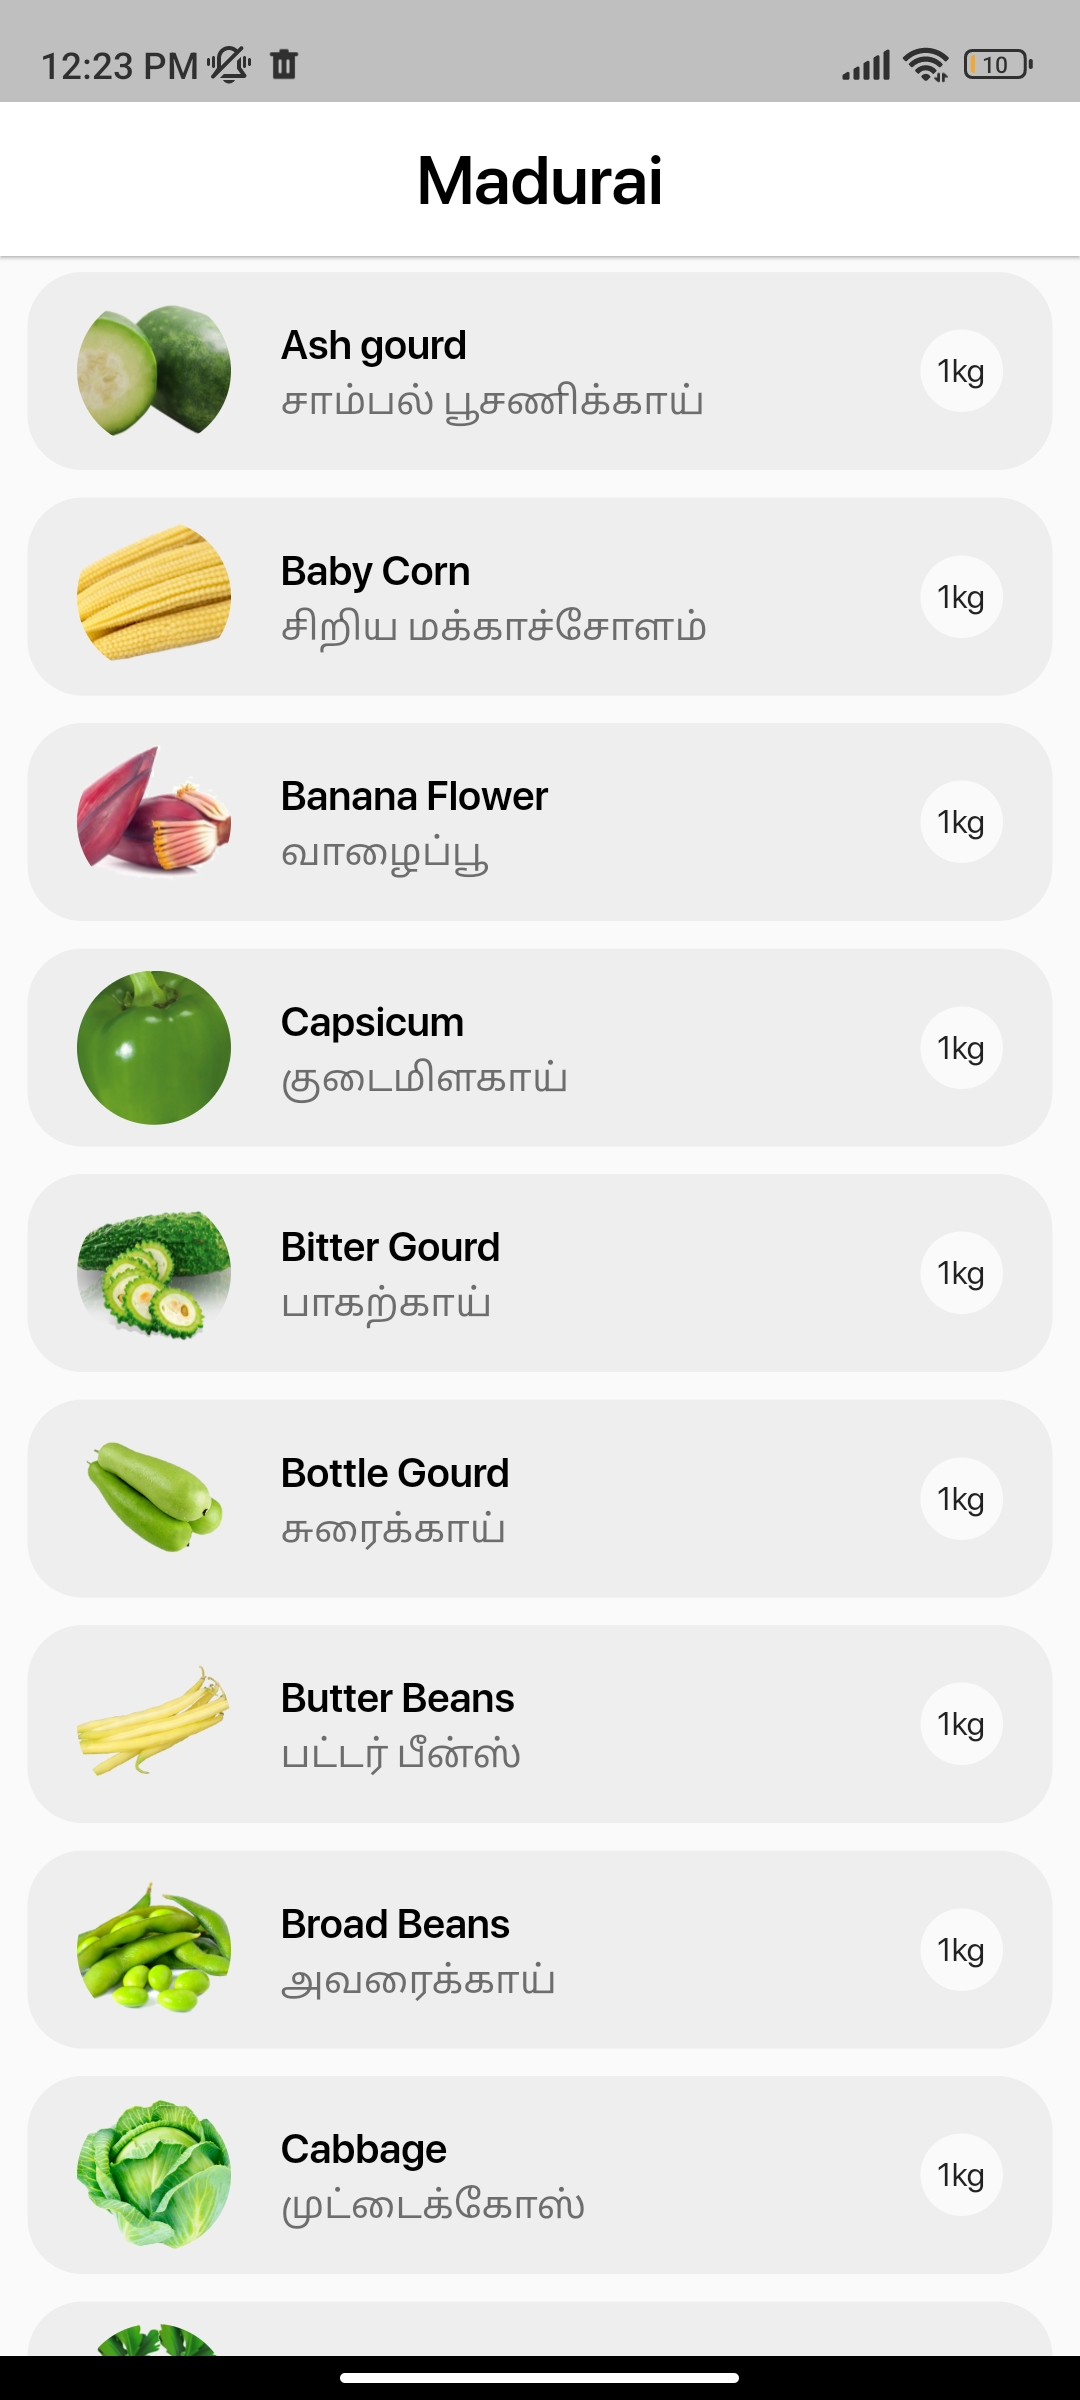 A Flutter app that provides daily updates on vegetable prices in Madurai, Tamil Nadu, India